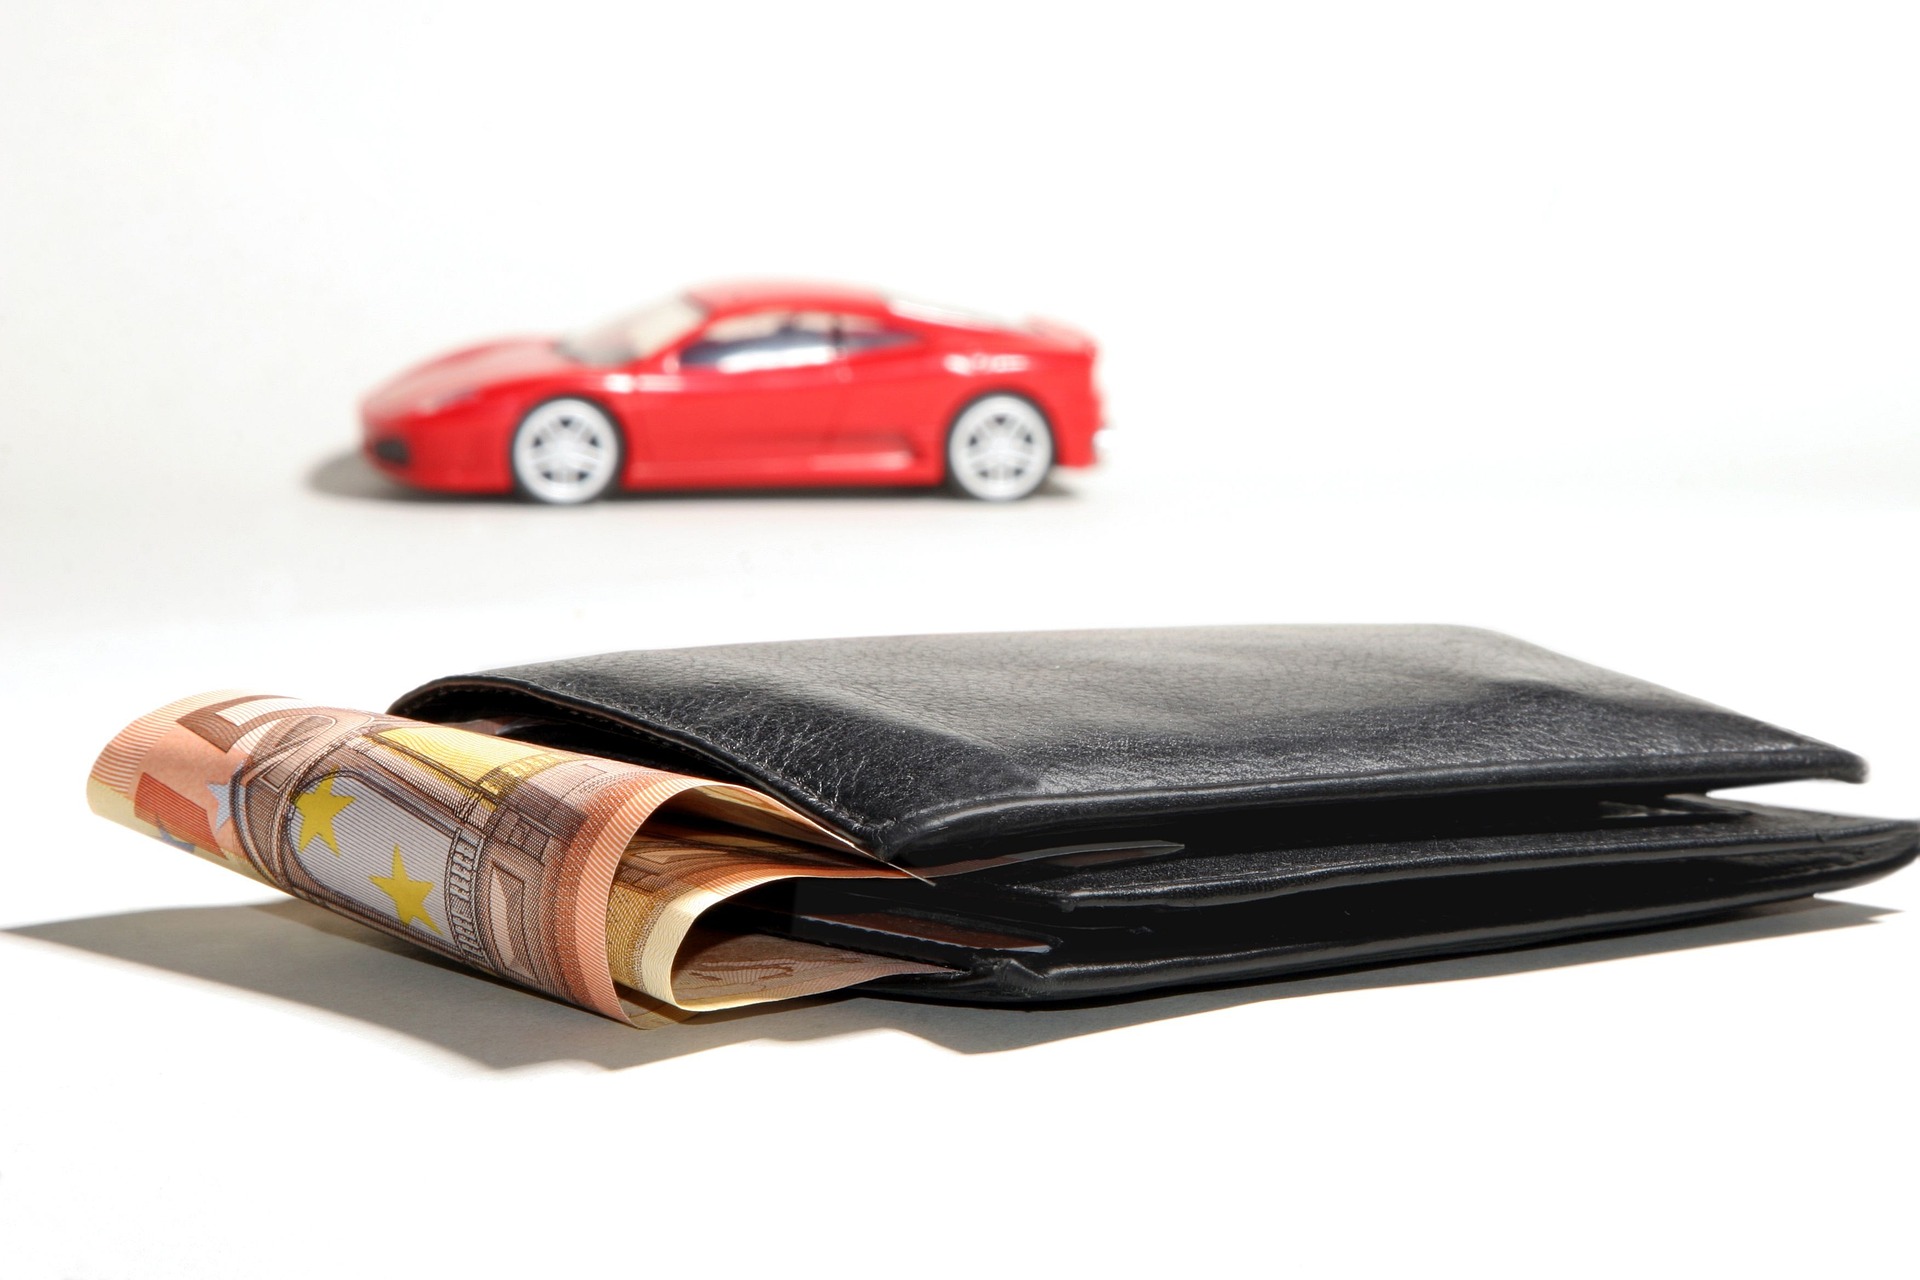 wallet and a car